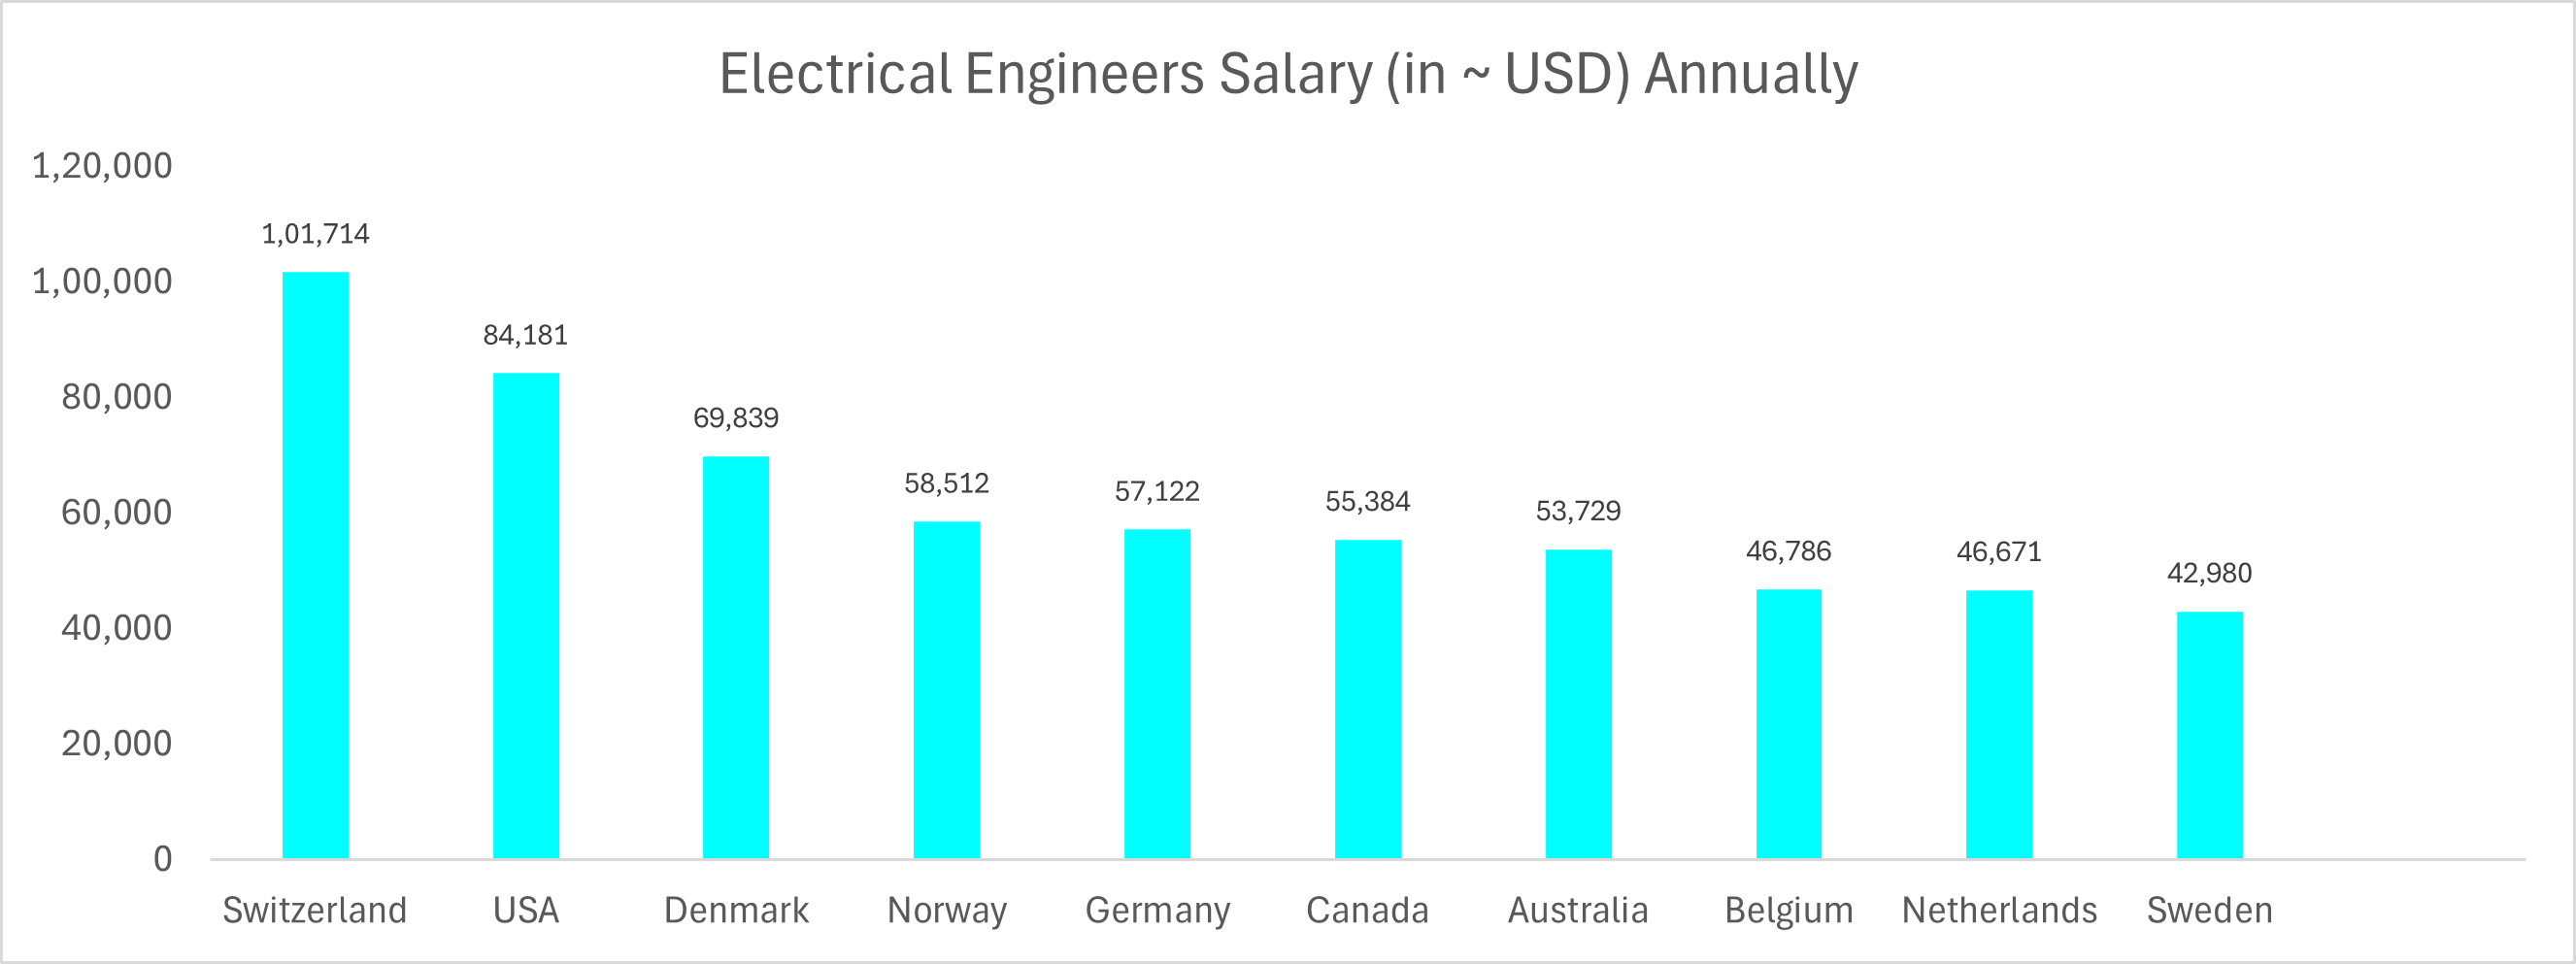 Electrical Engineers Salary (in ~ USD) Annually